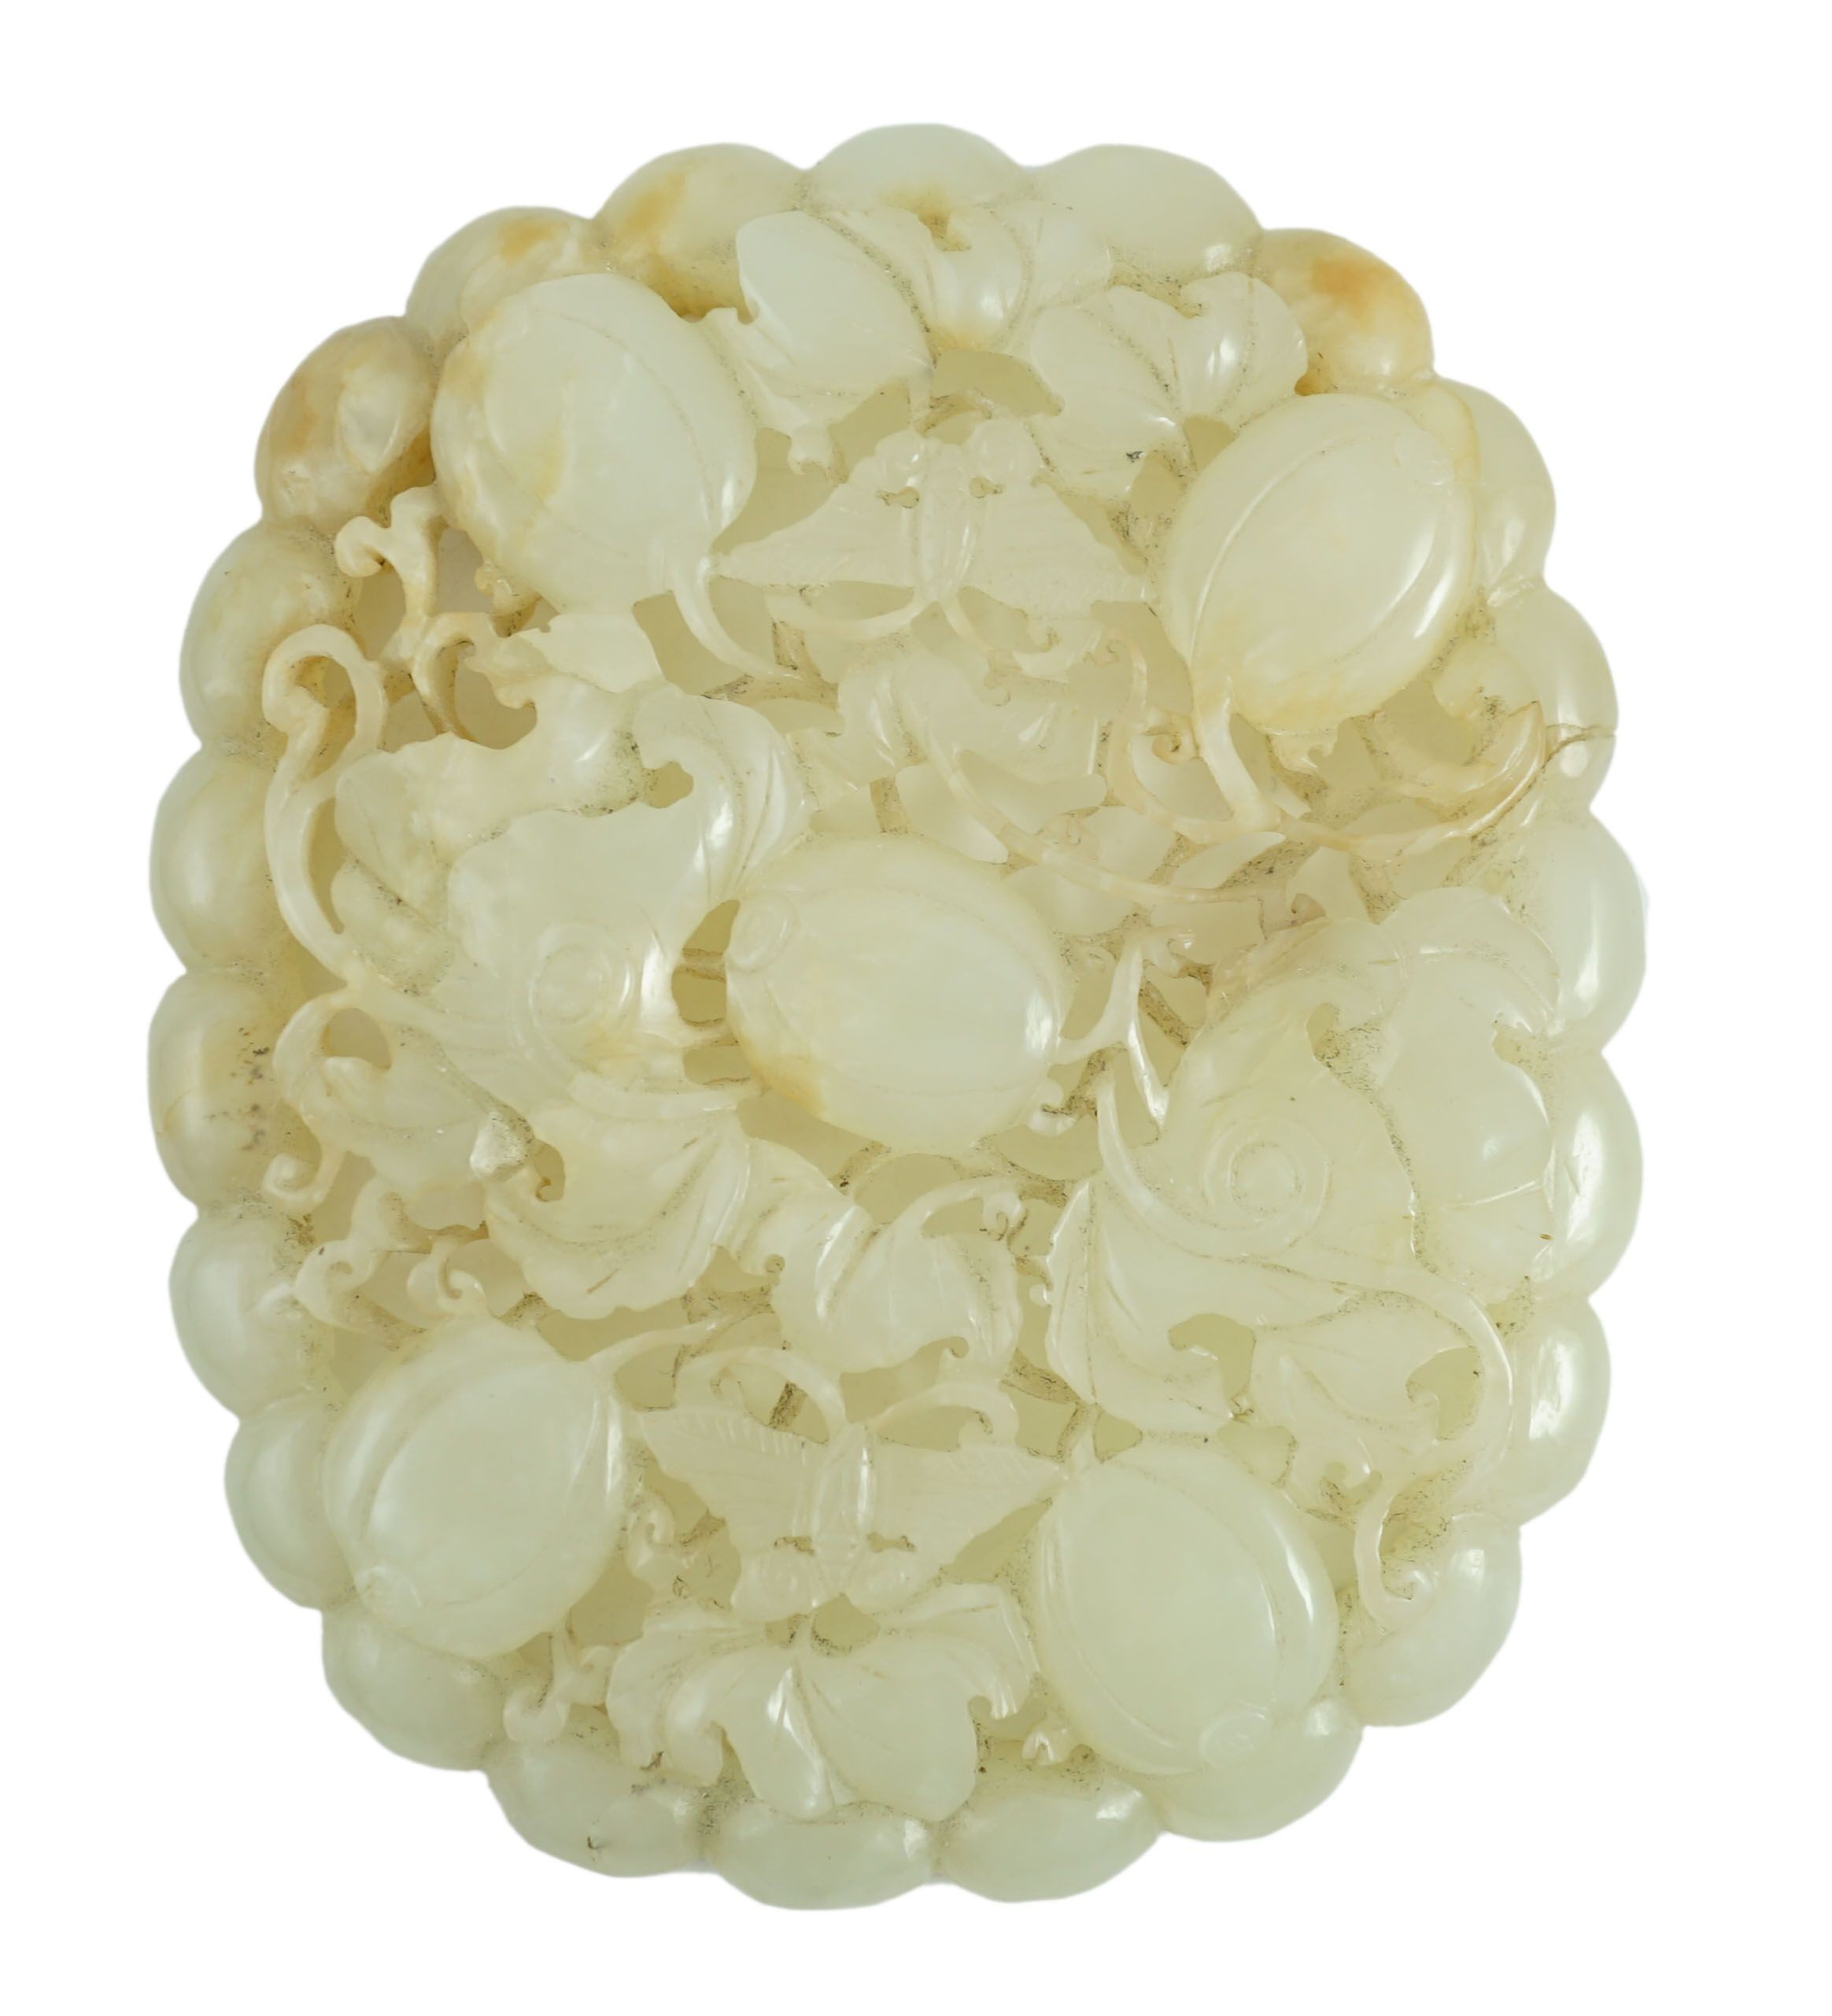 A Chinese pale celadon jade oval openwork plaque, 19th century, probably taken from a ruyi